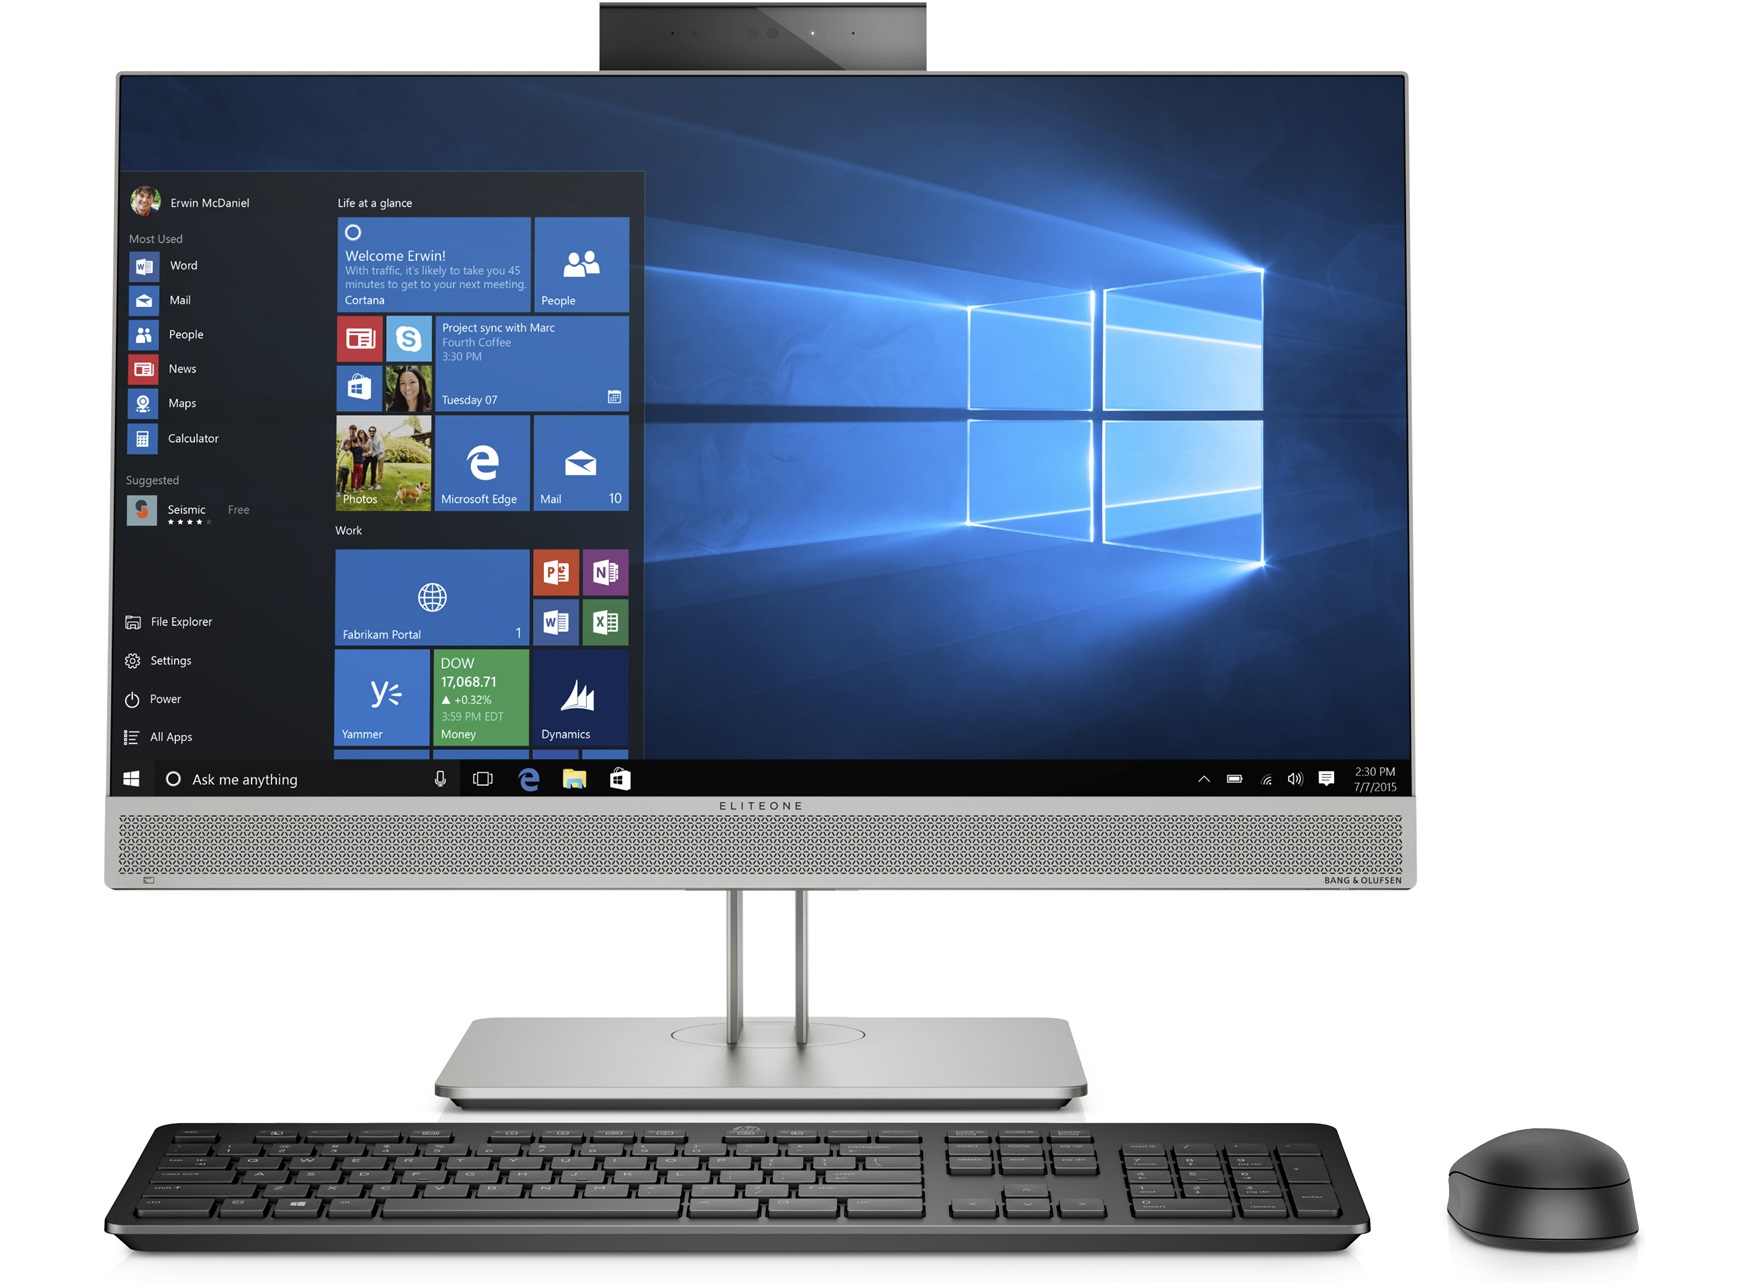 HP 800 EliteOne G5 AIO 23.8' NT  i7-9700 8GB 256GB SSD WIN10 PRO HDMI DP WEBCAM KB/Mouse 3YR ONSITE WTY W10P All-in-one Desktop PC (7NX91PA)